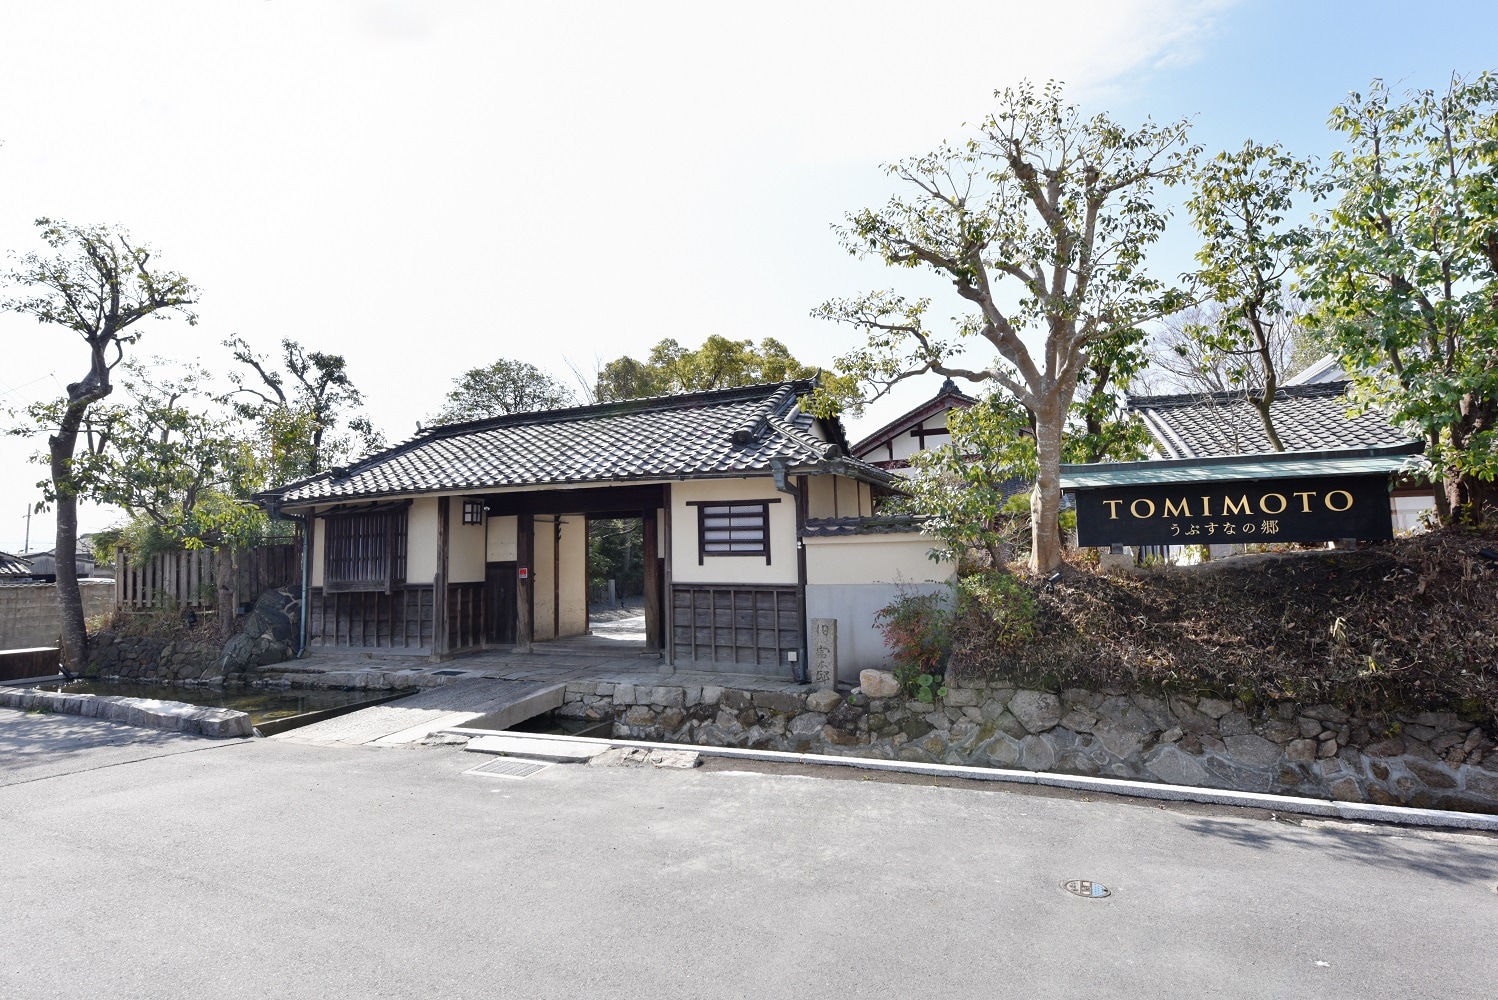 [Exterior] The front of the hotel is a gate from the Edo period